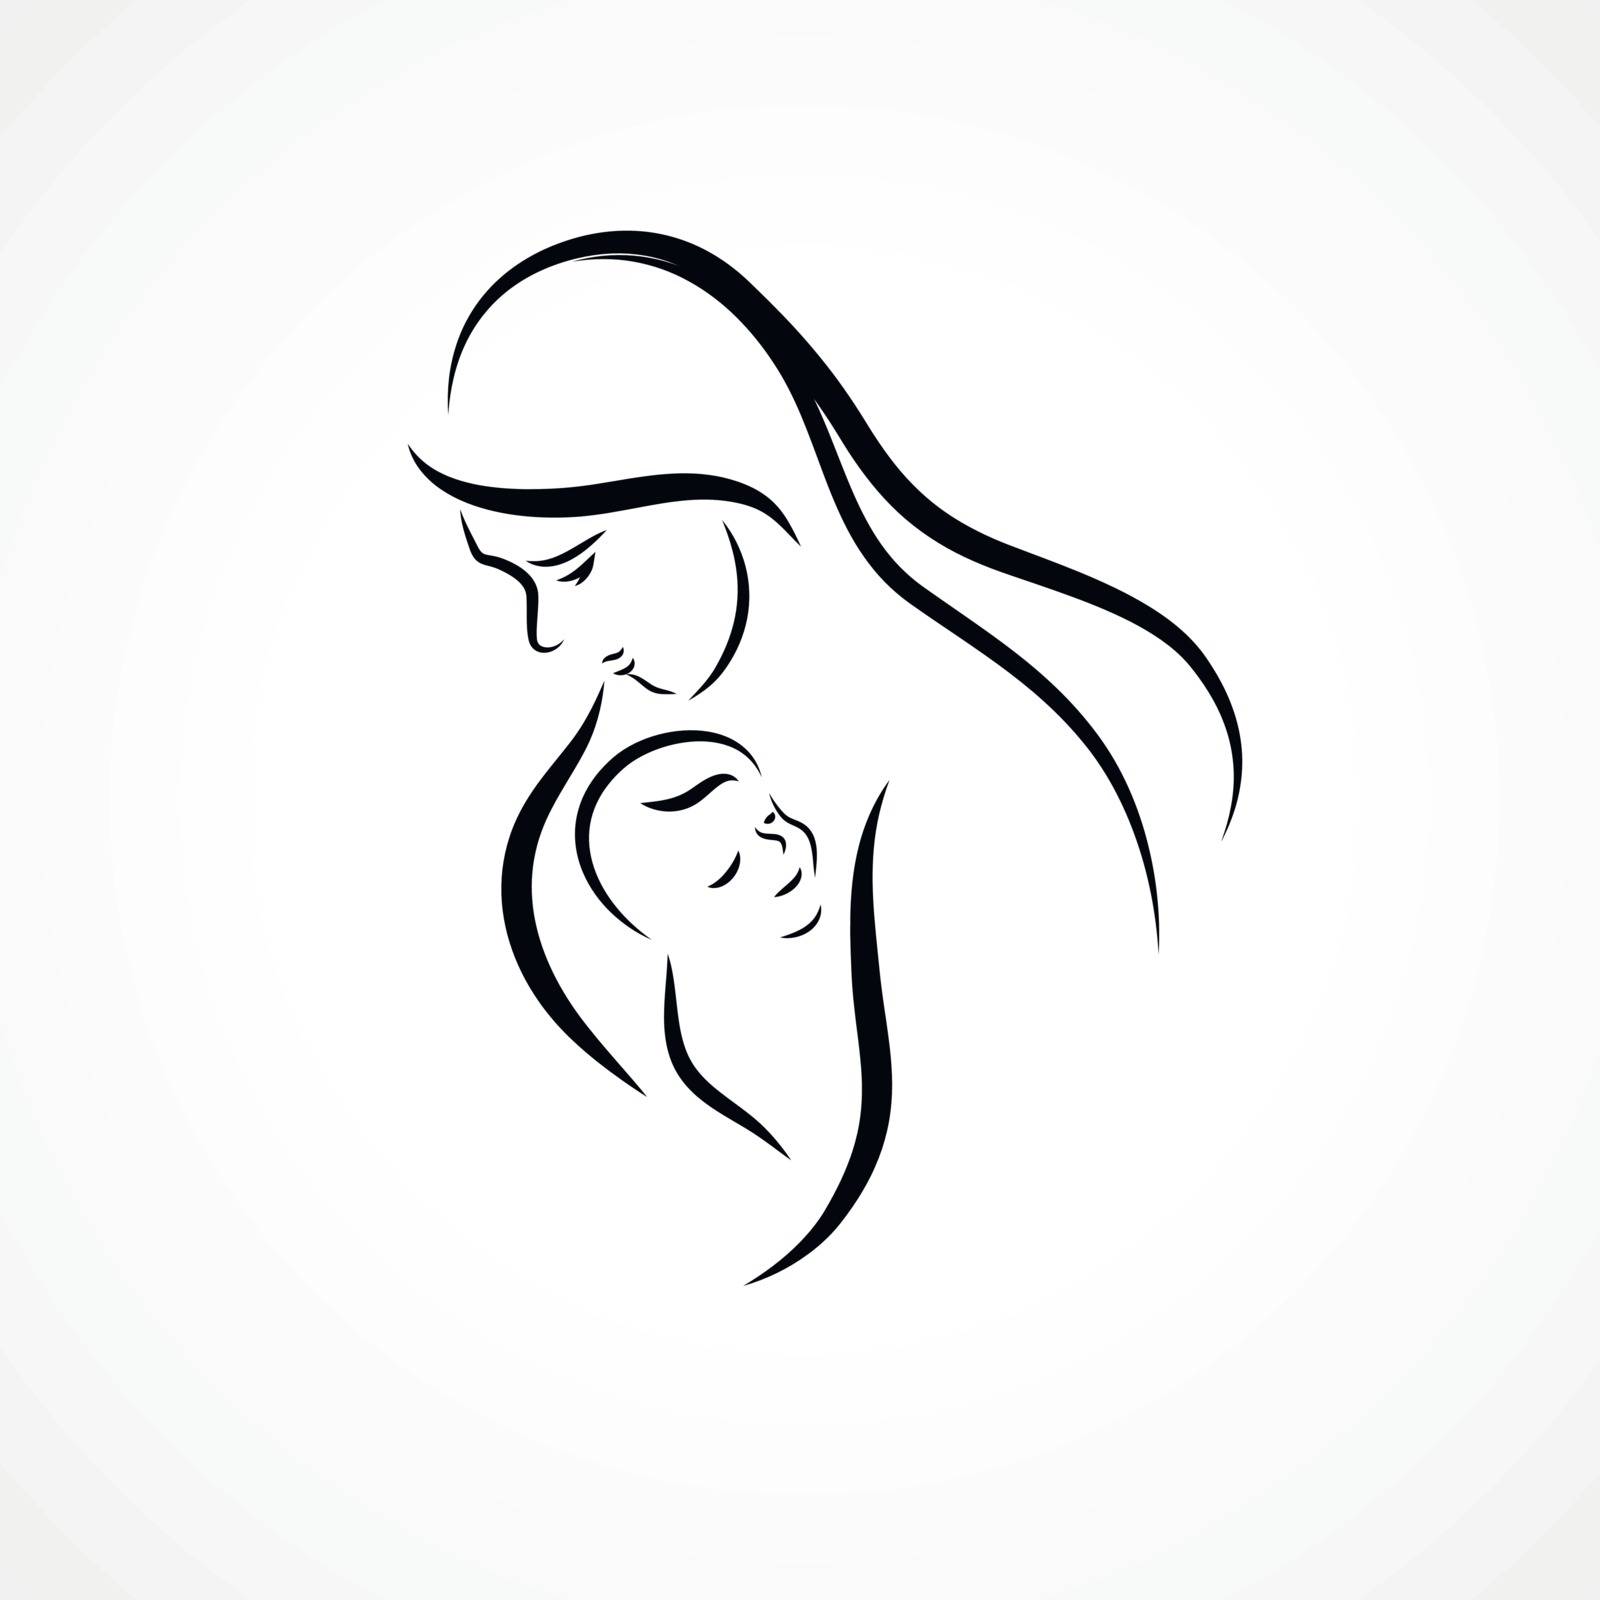 Vector illustration of a mother holding her baby